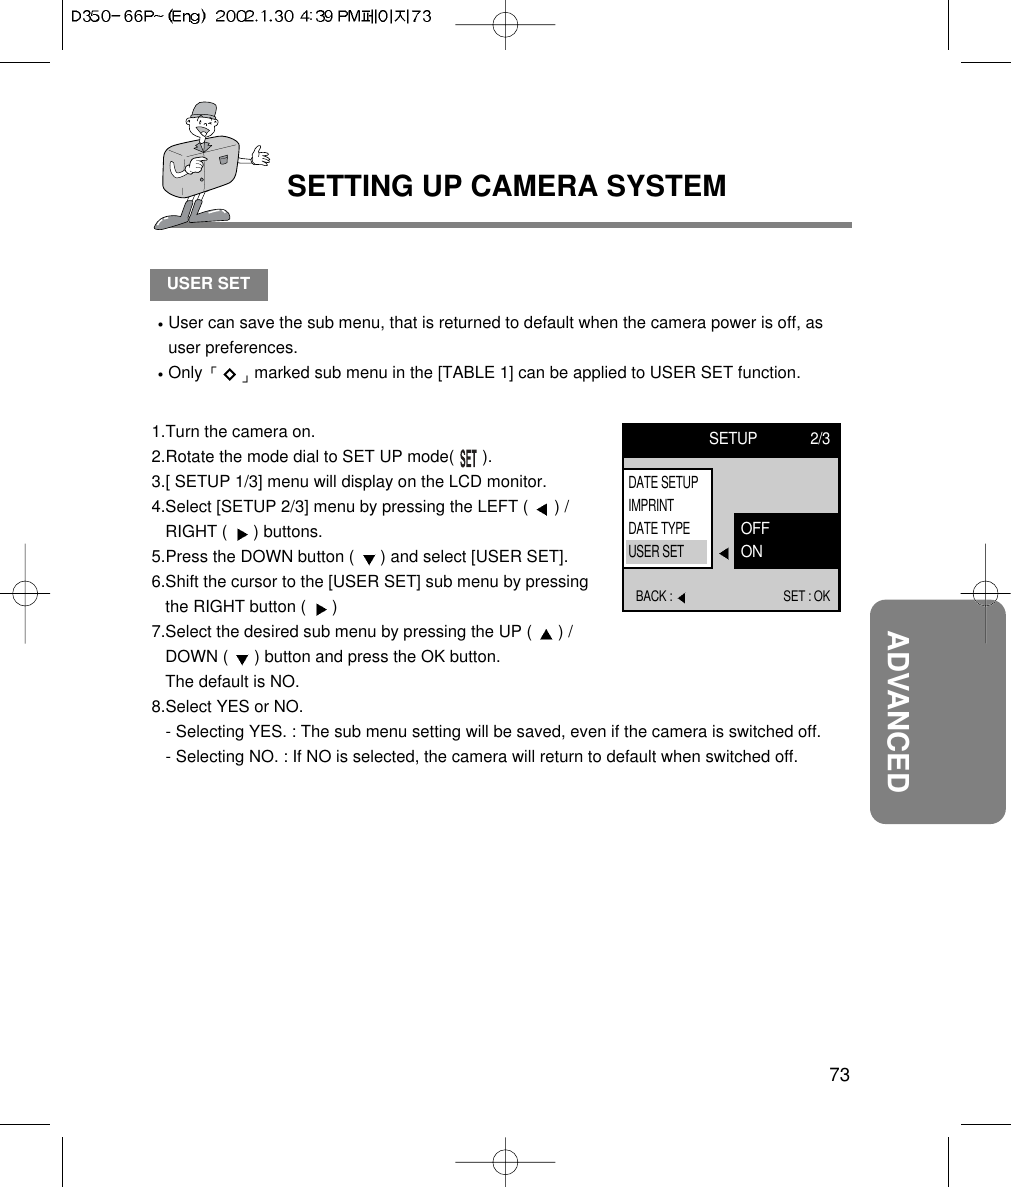 73ADVANCEDSETTING UP CAMERA SYSTEMUSER SETUser can save the sub menu, that is returned to default when the camera power is off, asuser preferences.Only  marked sub menu in the [TABLE 1] can be applied to USER SET function.1.Turn the camera on.2.Rotate the mode dial to SET UP mode(      ).3.[ SETUP 1/3] menu will display on the LCD monitor.4.Select [SETUP 2/3] menu by pressing the LEFT (  ) /RIGHT (  ) buttons.5.Press the DOWN button (  ) and select [USER SET].6.Shift the cursor to the [USER SET] sub menu by pressingthe RIGHT button (  ) 7.Select the desired sub menu by pressing the UP (  ) /DOWN (  ) button and press the OK button.The default is NO.8.Select YES or NO.- Selecting YES. : The sub menu setting will be saved, even if the camera is switched off.- Selecting NO. : If NO is selected, the camera will return to default when switched off.SETUP 2/3BACK :  SET : OKOFFONDATE SETUPIMPRINTDATE TYPEUSER SET